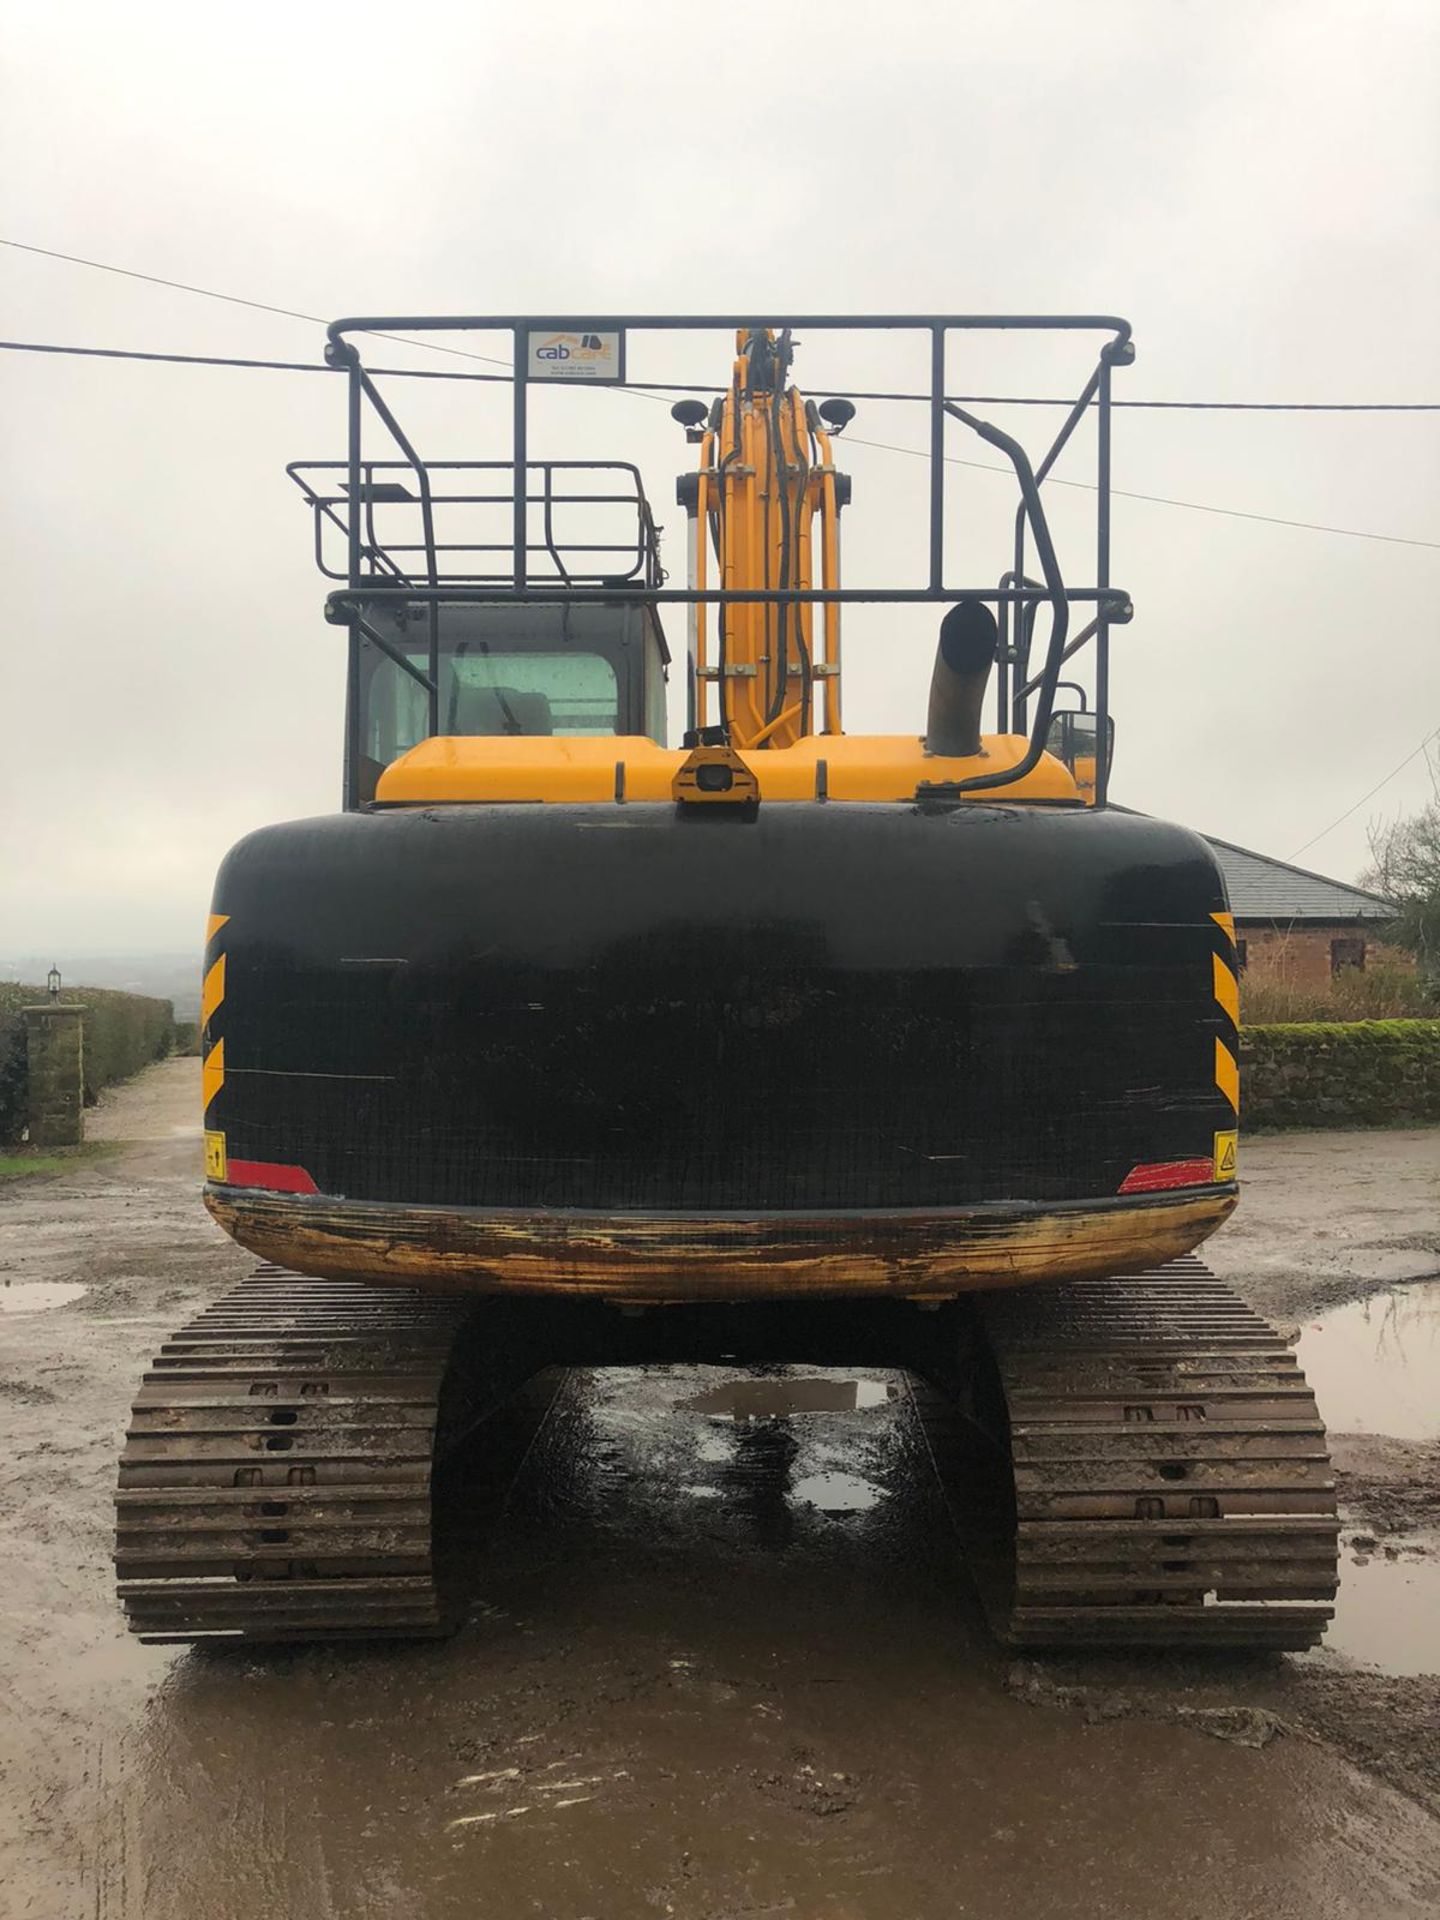 2015 JCB JS130LC 13 TON TRACKED CRAWLER EXCAVATOR / DIGGER, IN VERY GOOD CONDITION, LOW HOURS 4620! - Image 4 of 11